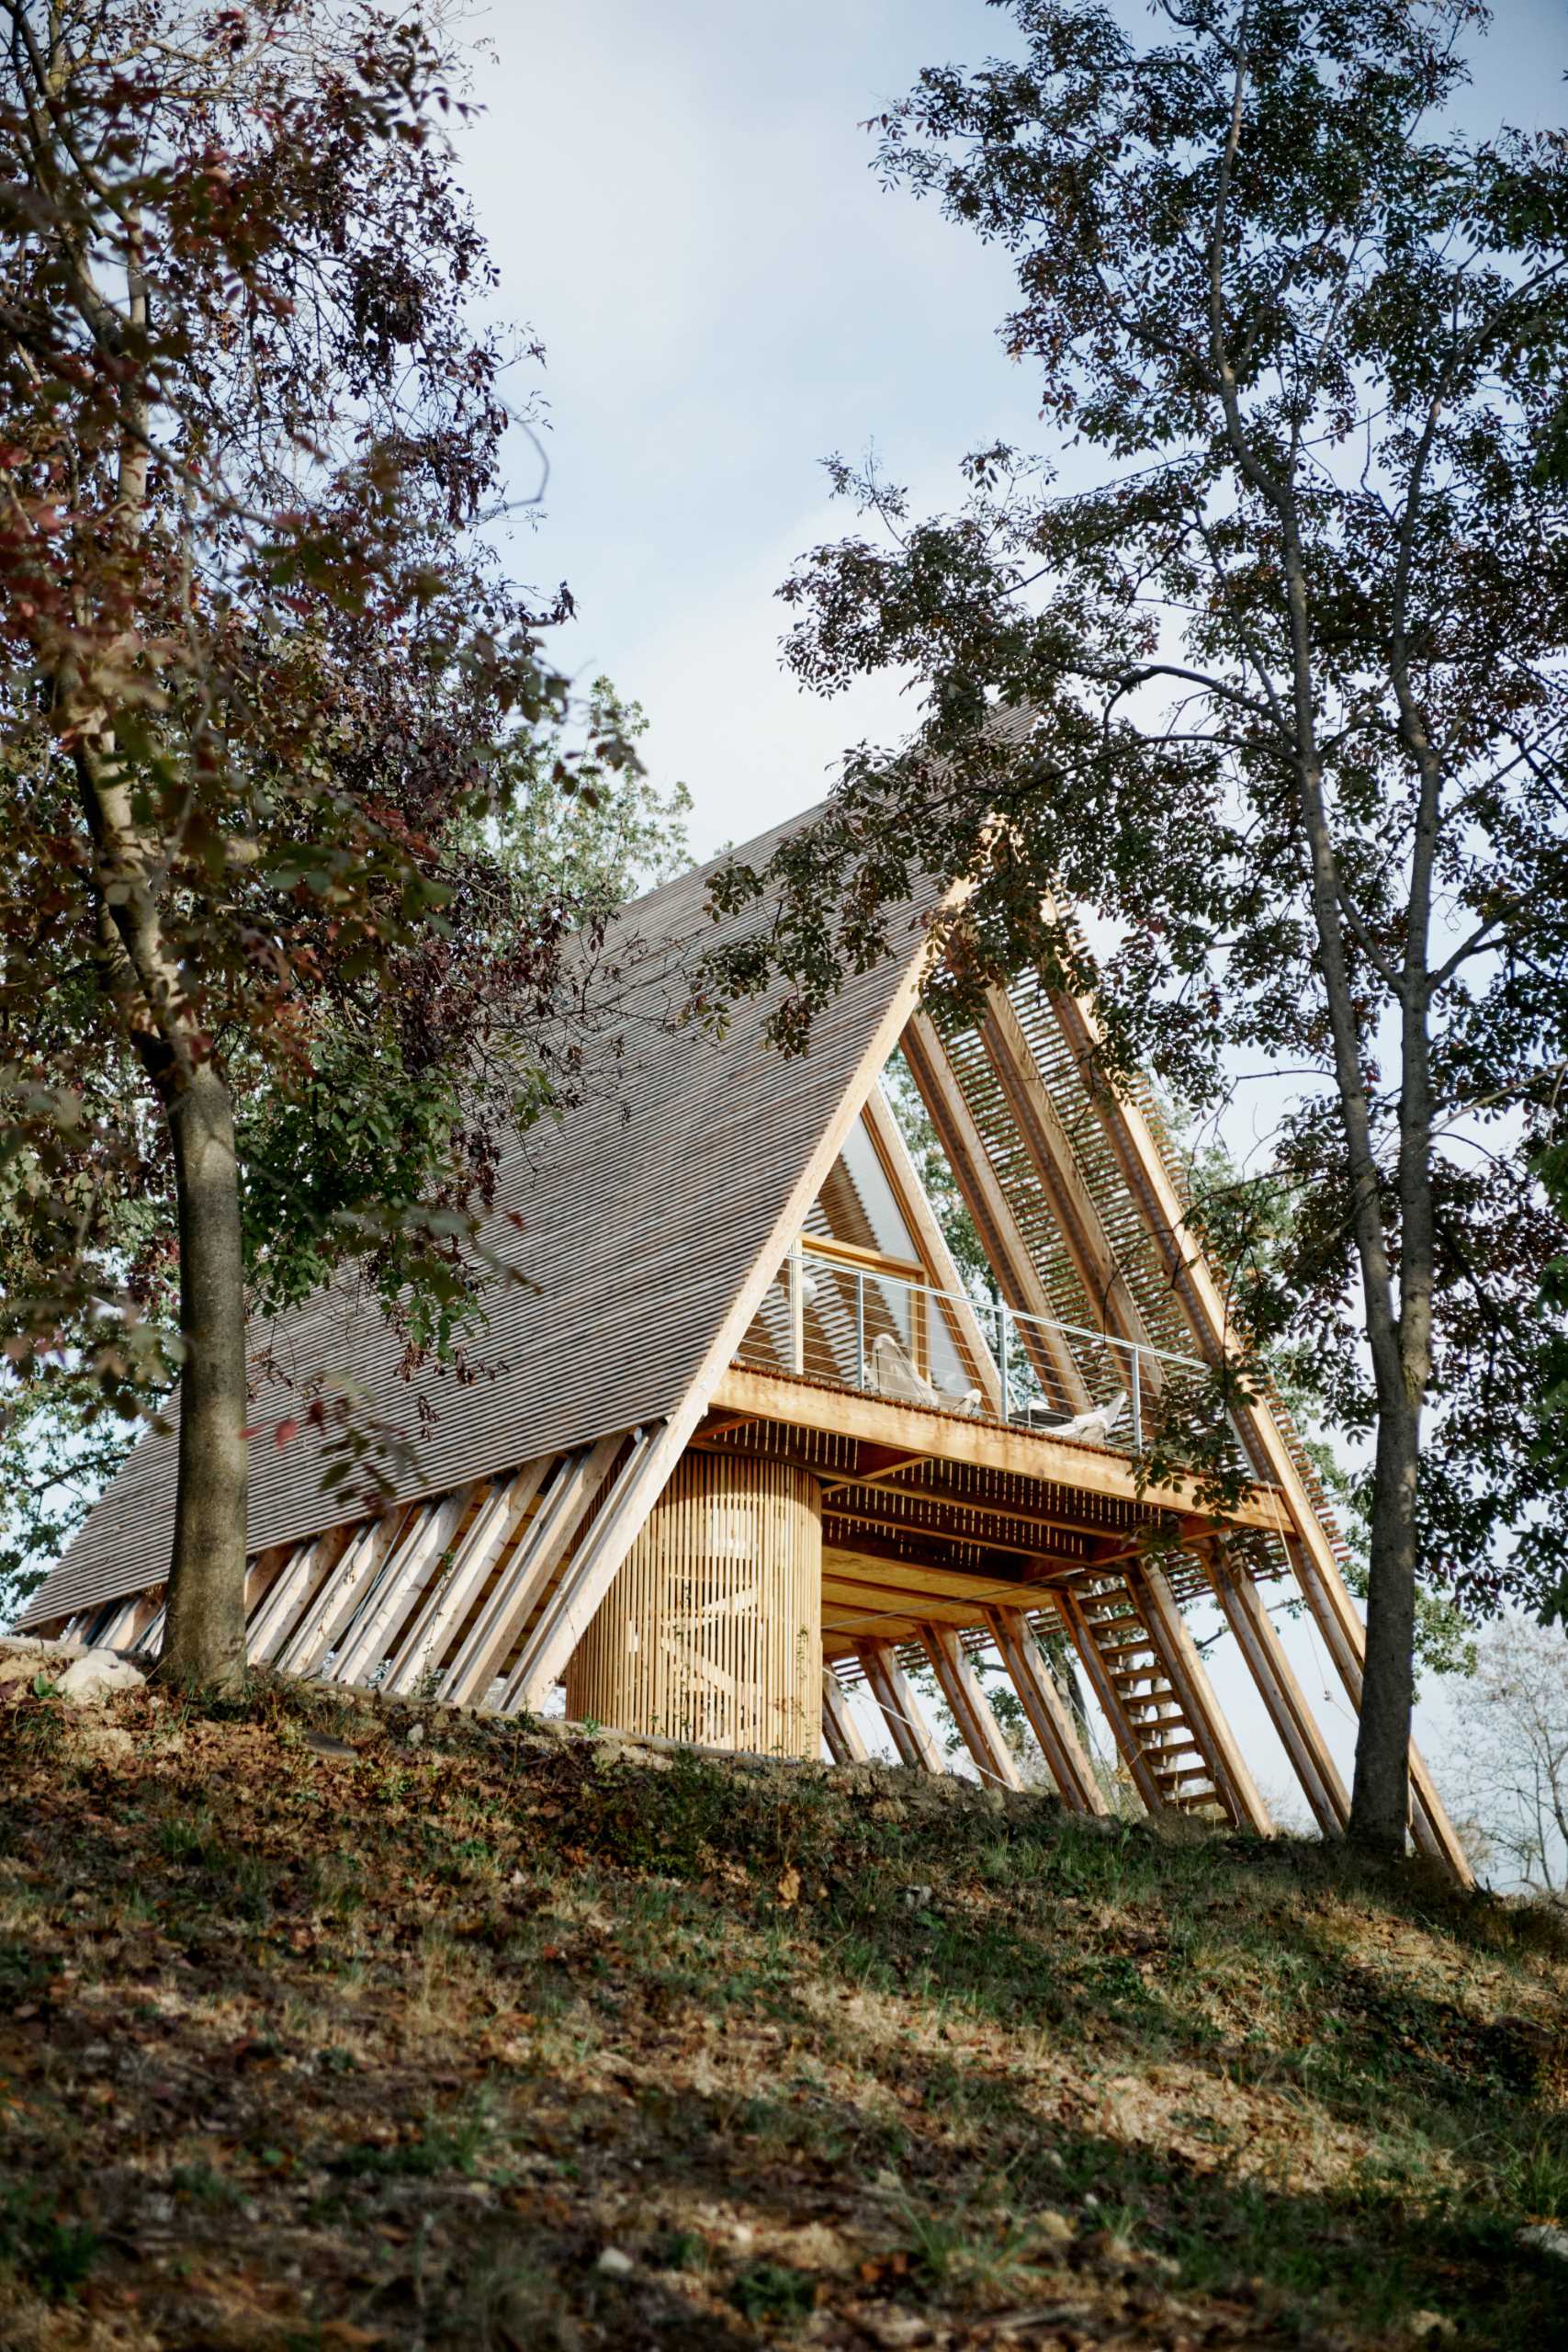 This modern A-frame cabin is raised off the ground, a construction approach that responds to the sloping land of the site.